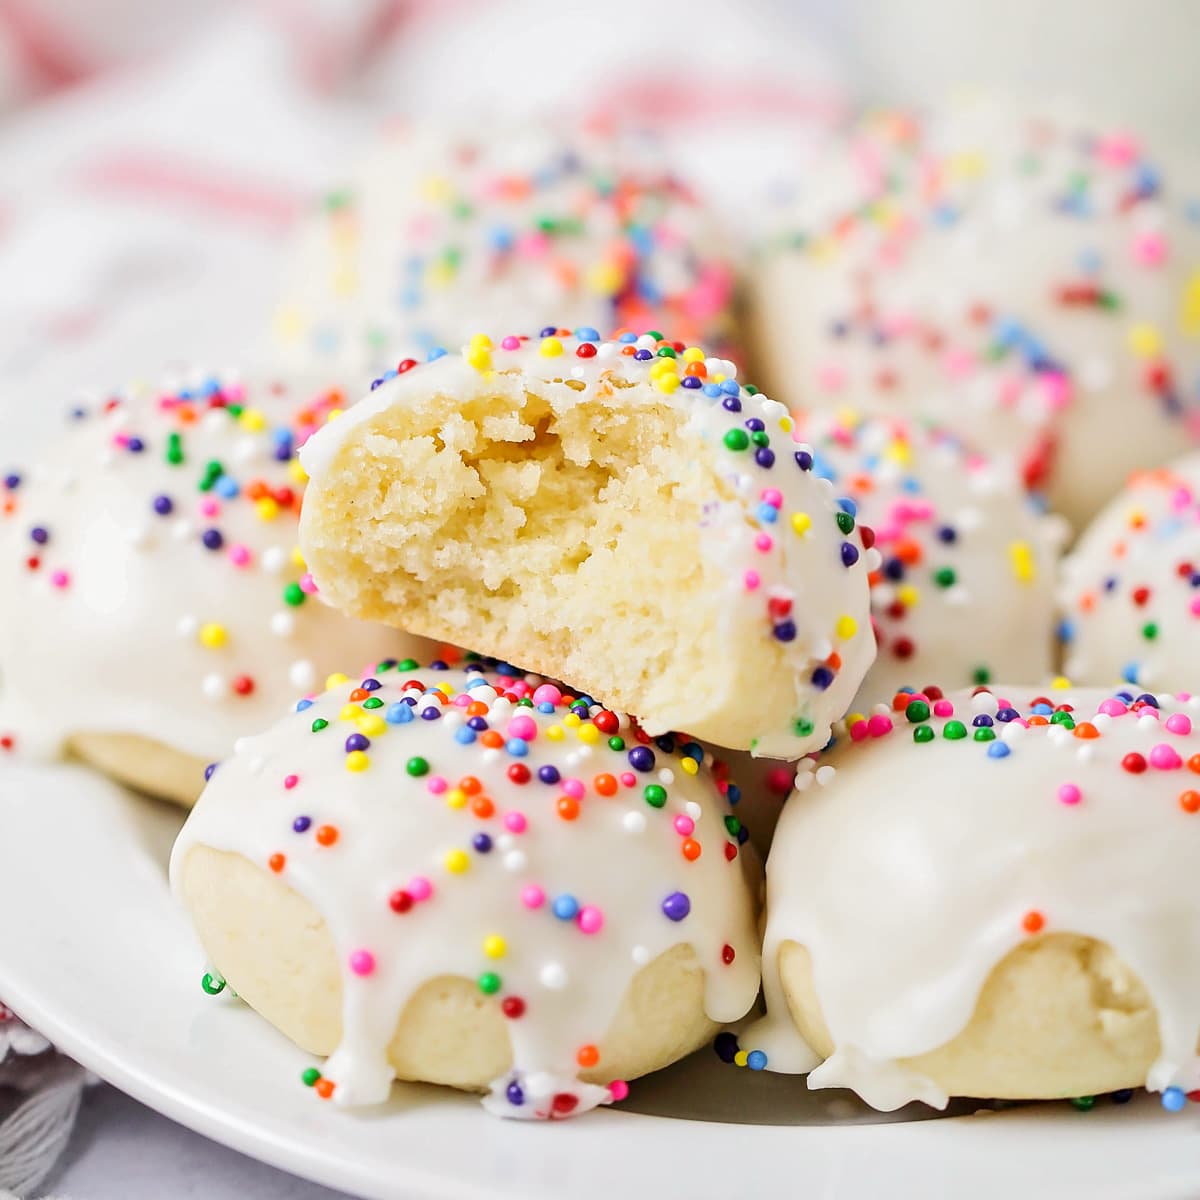 Italian Cookies topped with glaze and sprinkles with one missing a bite.